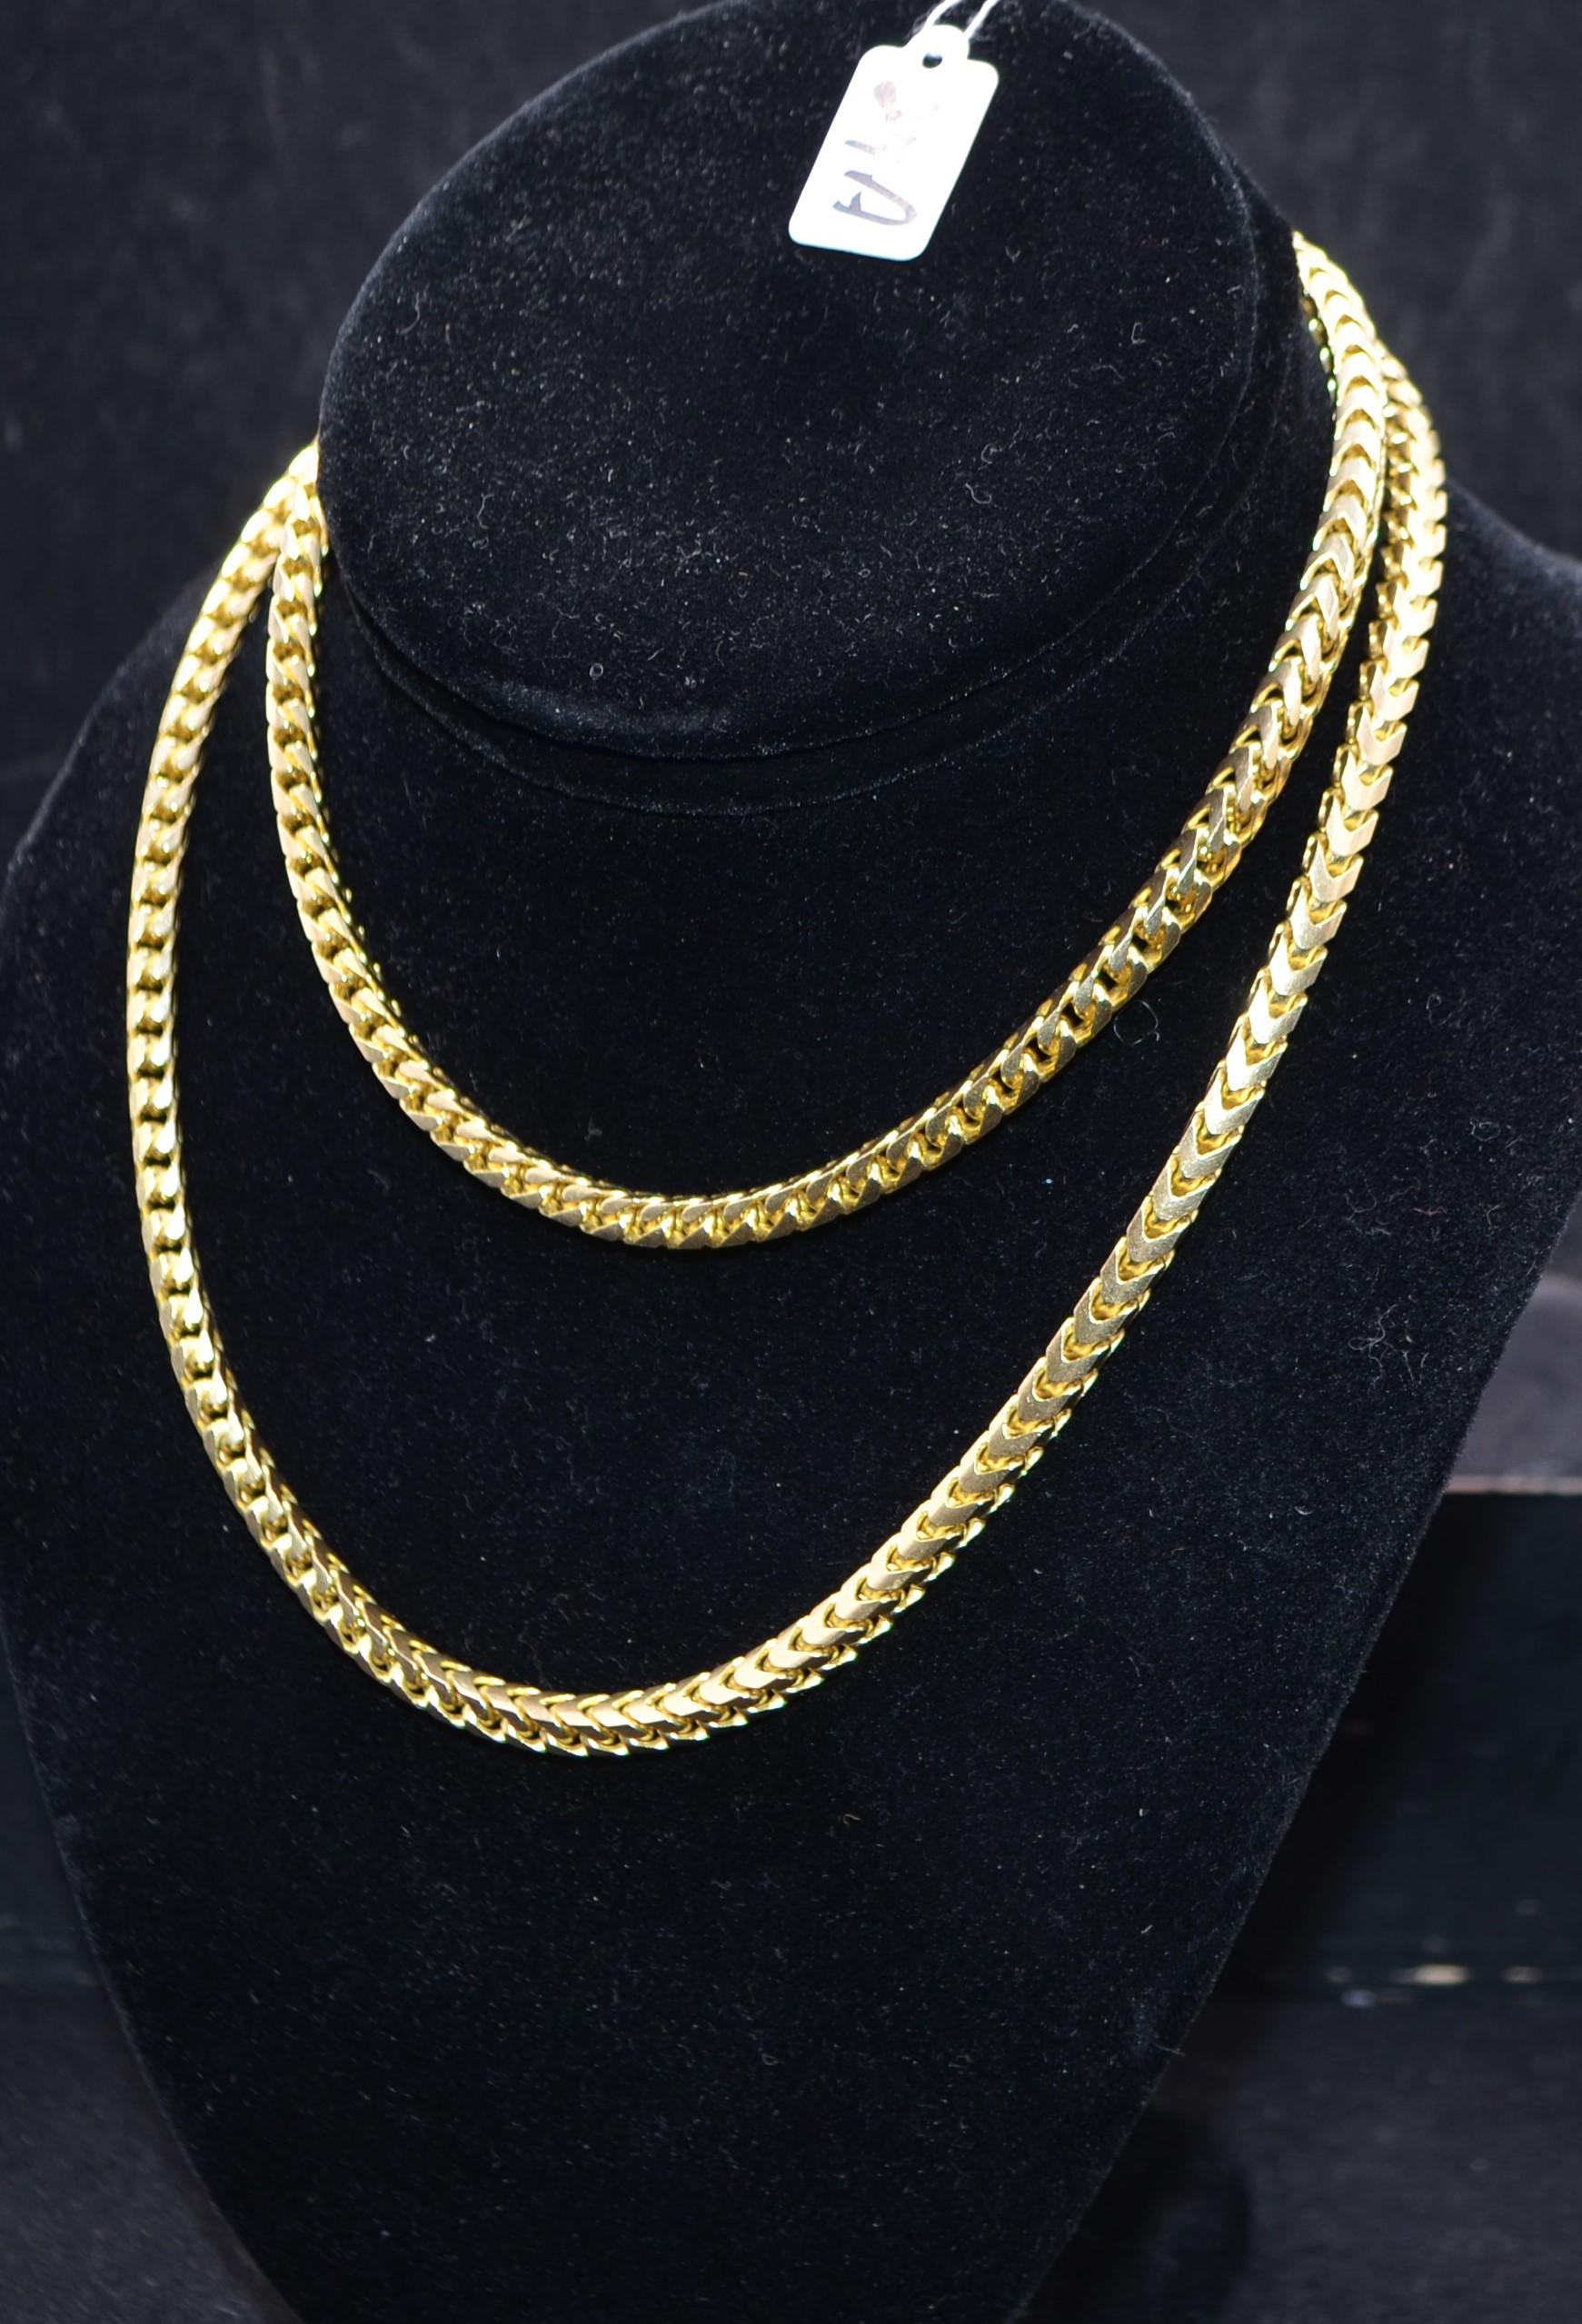 30 INCH LARGE BOX LINK 14K YELLOW GOLD NECKLACE